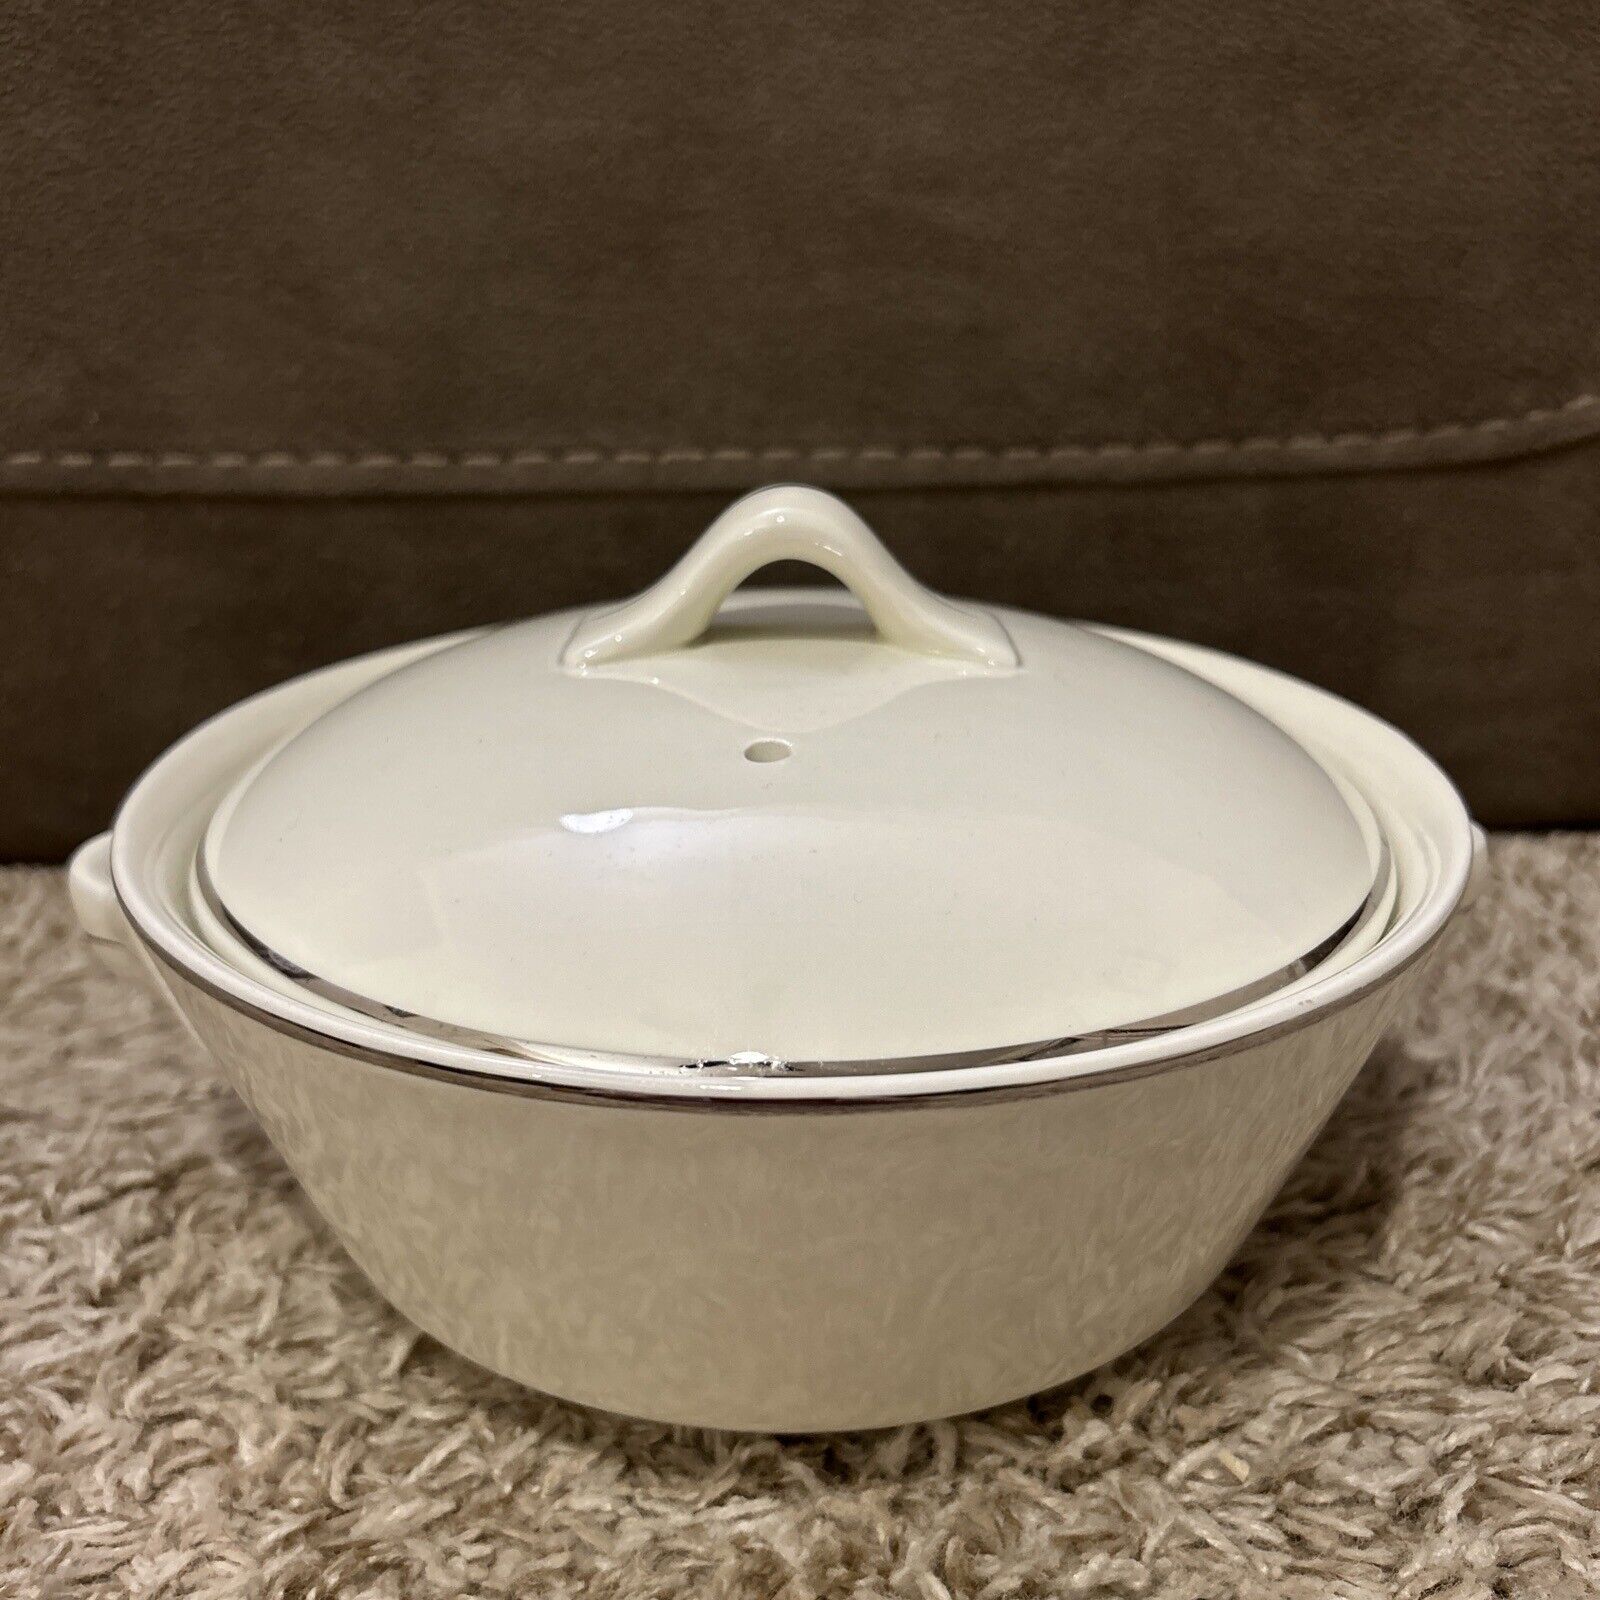 Ballerina Platinum by Universal 8in 1.25 Qt Round Covered Casserole Dish USA MCM